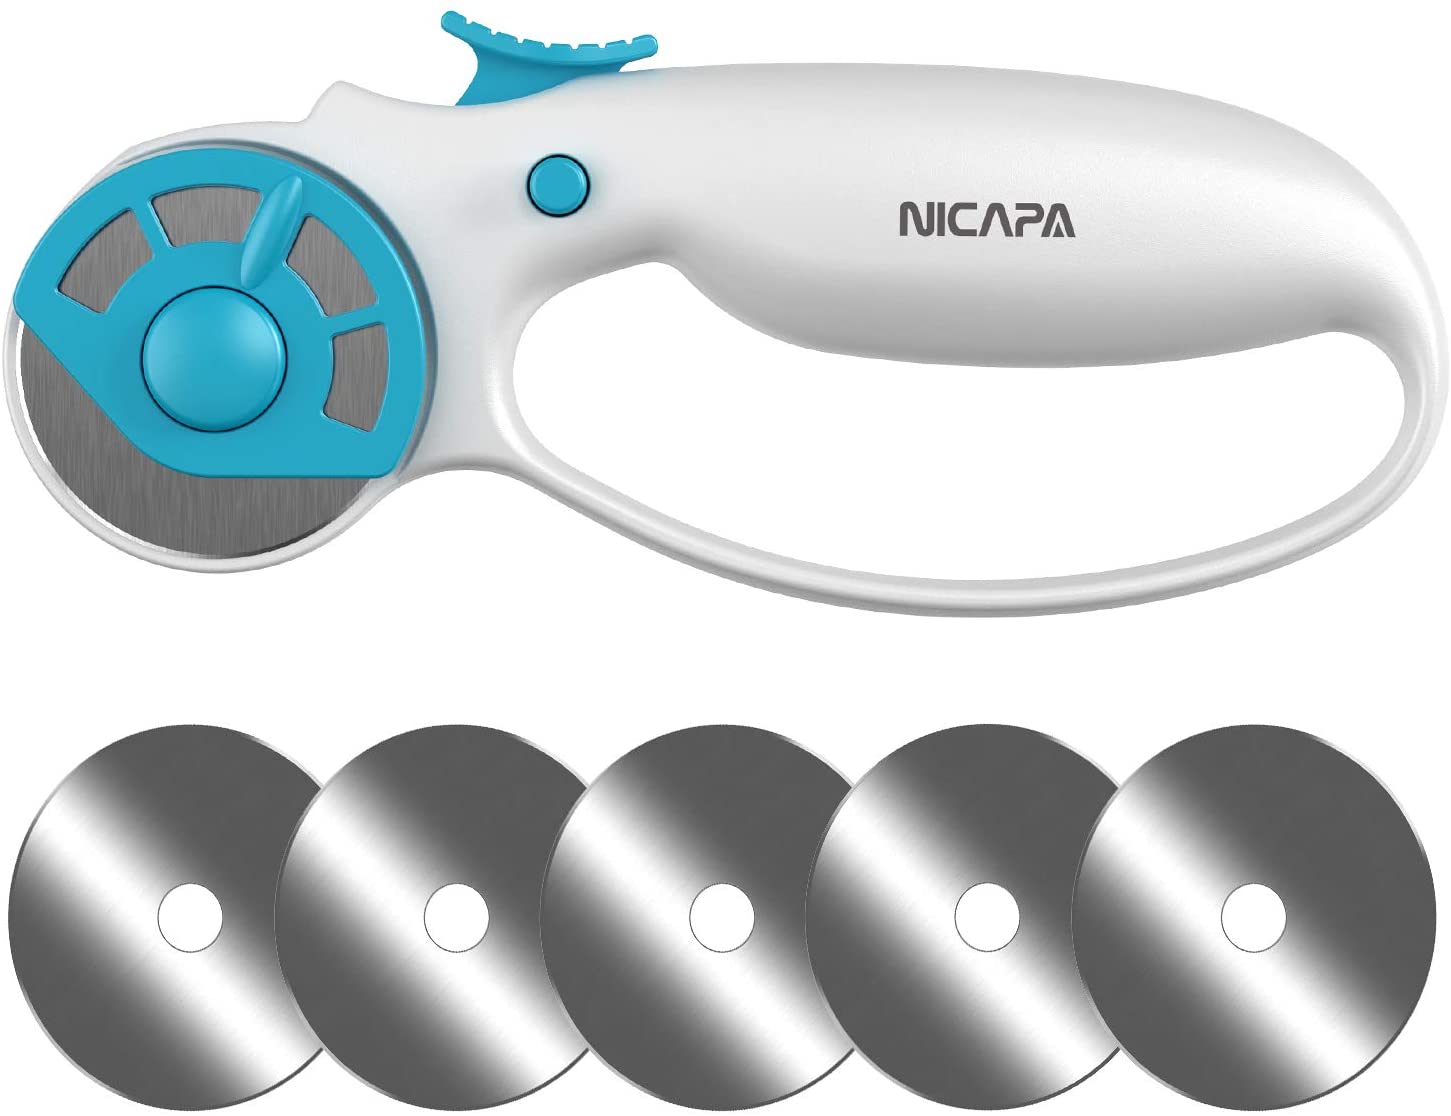 NICAPA Classic Sewing Rotary Cutter, 45mm